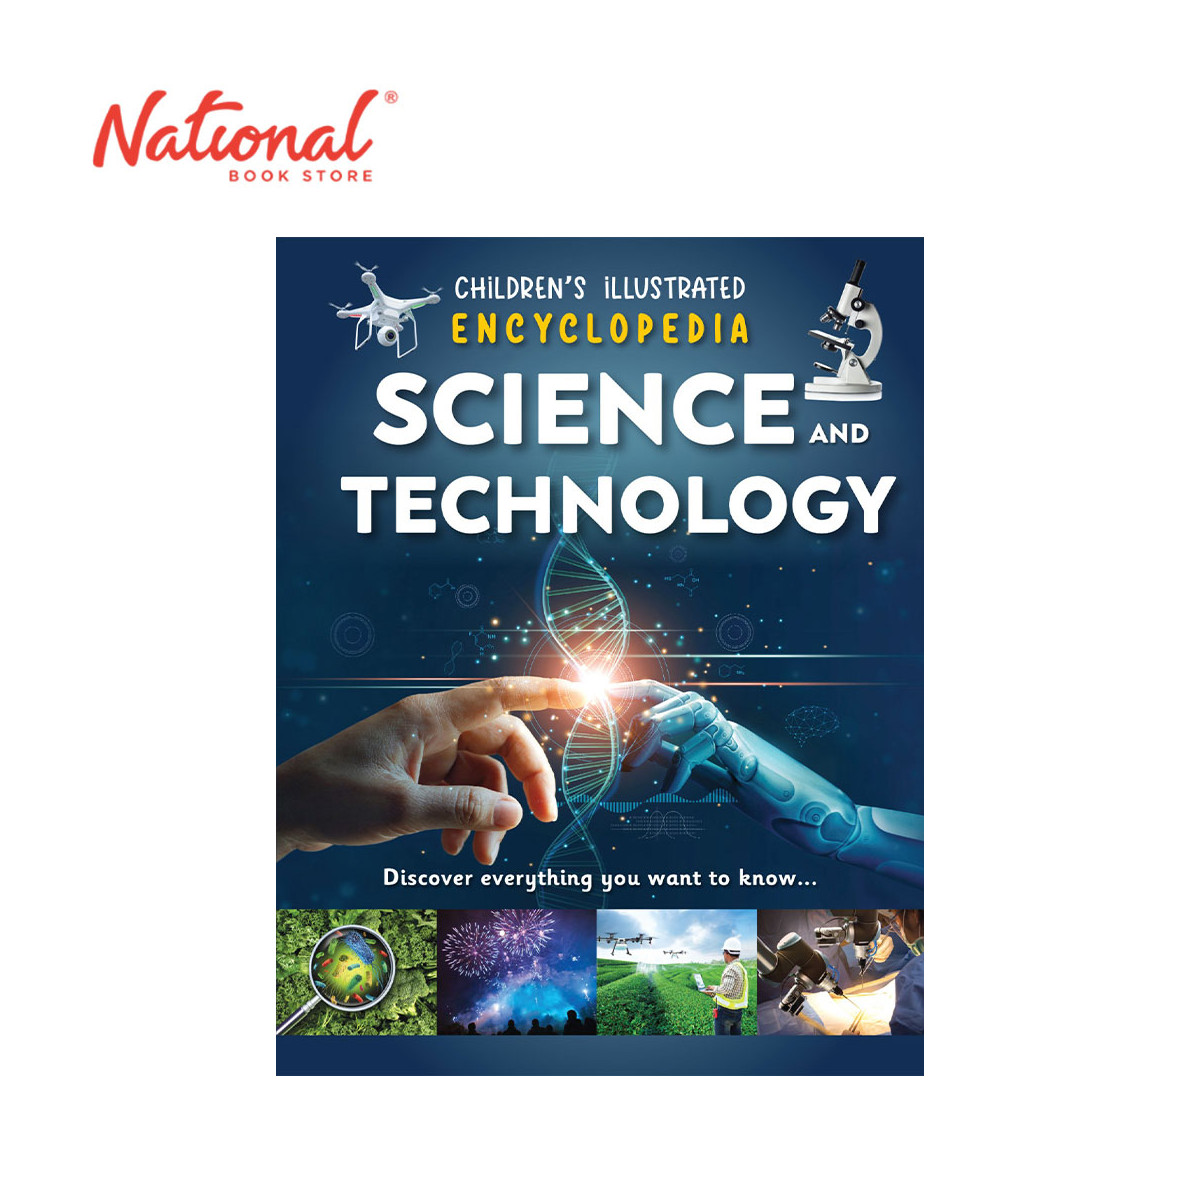 Children's Illustrated Encyclopedia: Science & Technology - Trade Paperback - Books for Kids